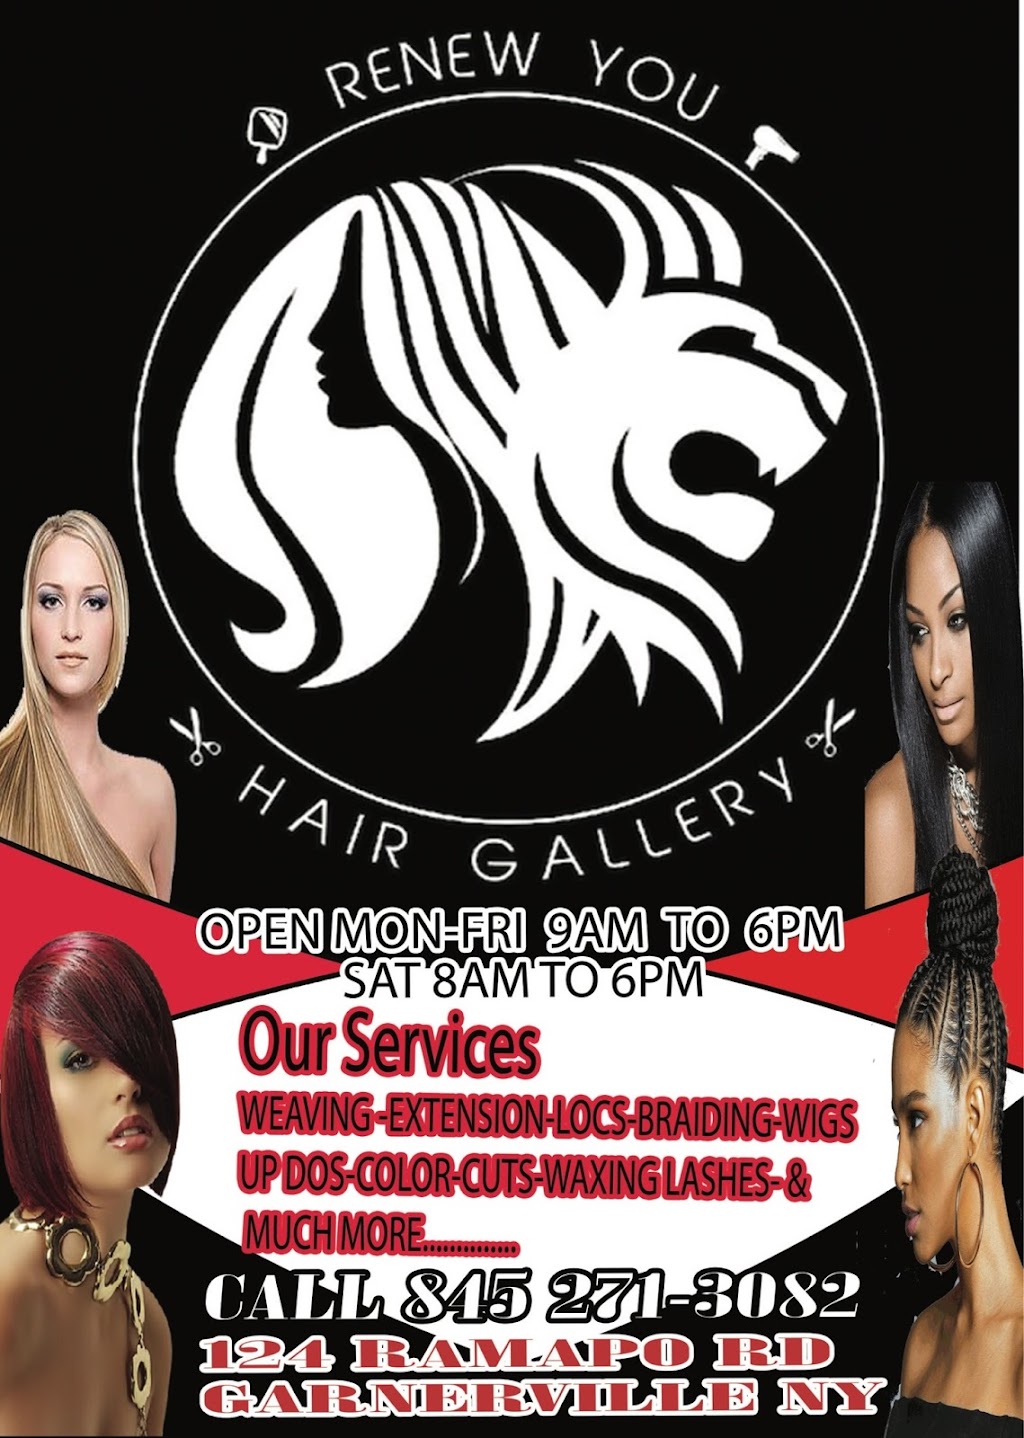 Renew you hair gallery | 71 Broadway, Haverstraw, NY 10927 | Phone: (845) 271-3082